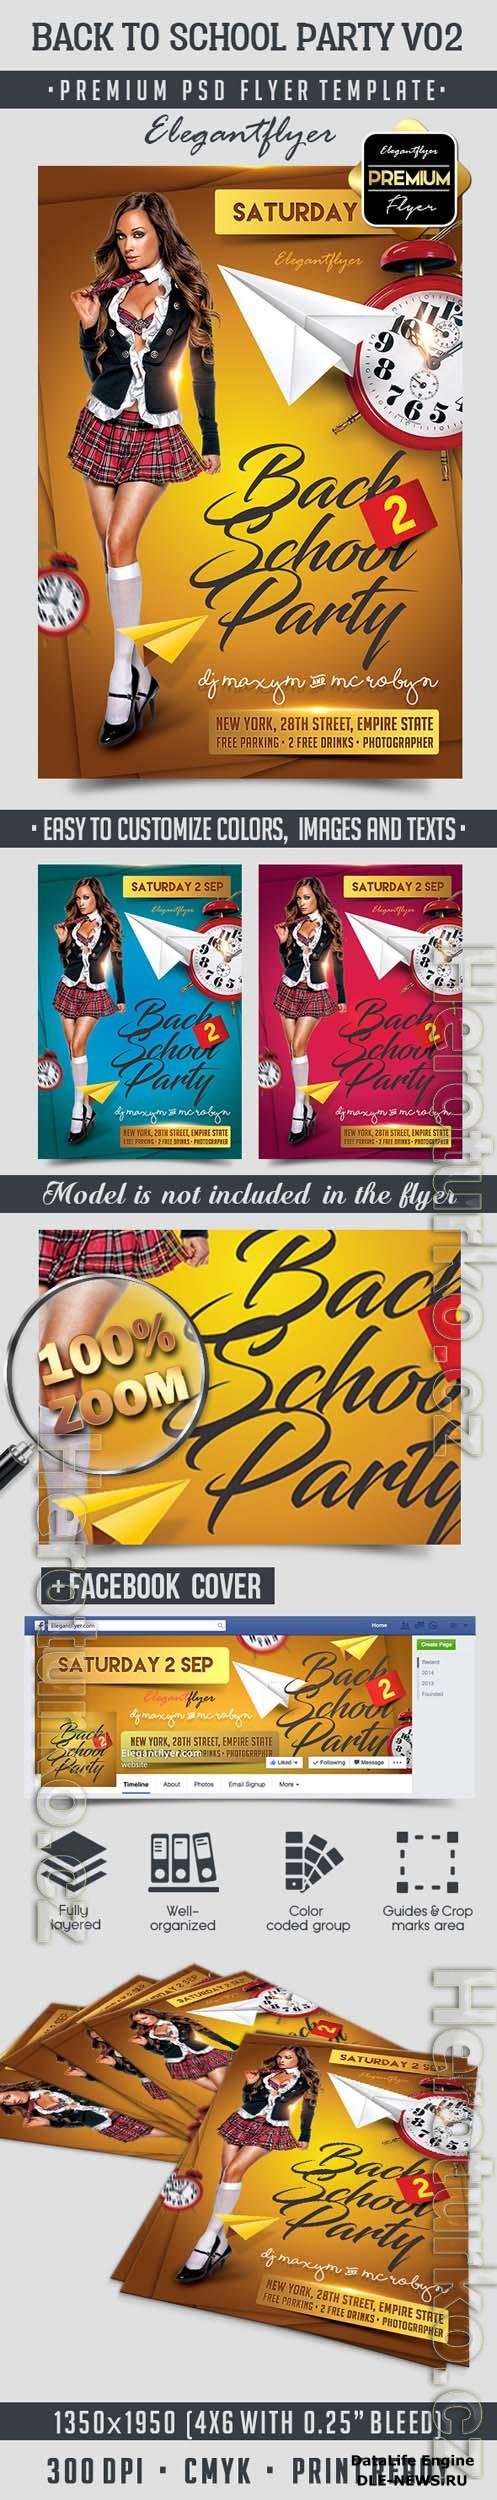 Back to School Party V02 Flyer PSD Template